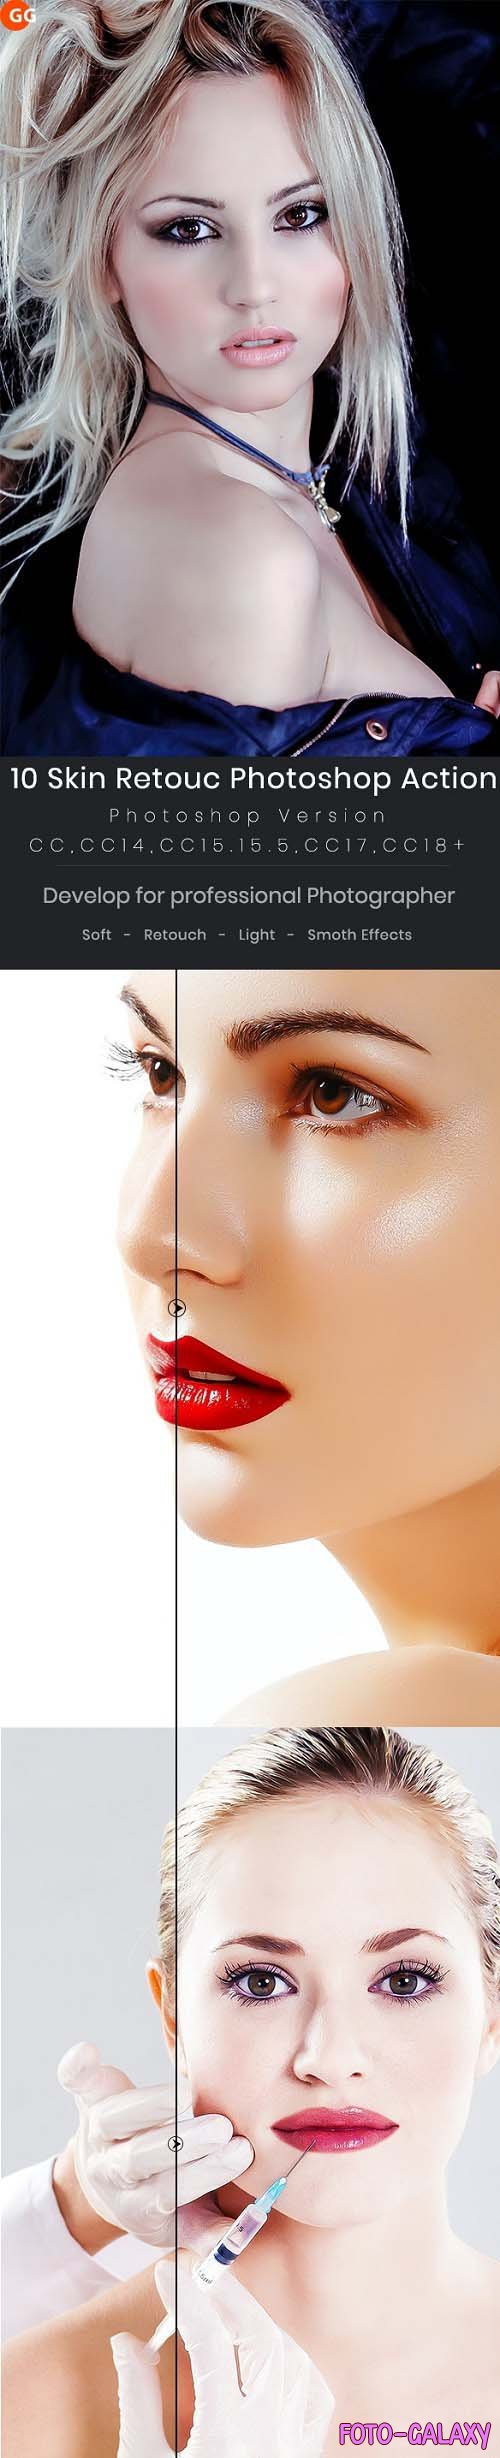 10 Skin Retouch Photoshop Action - 21648340